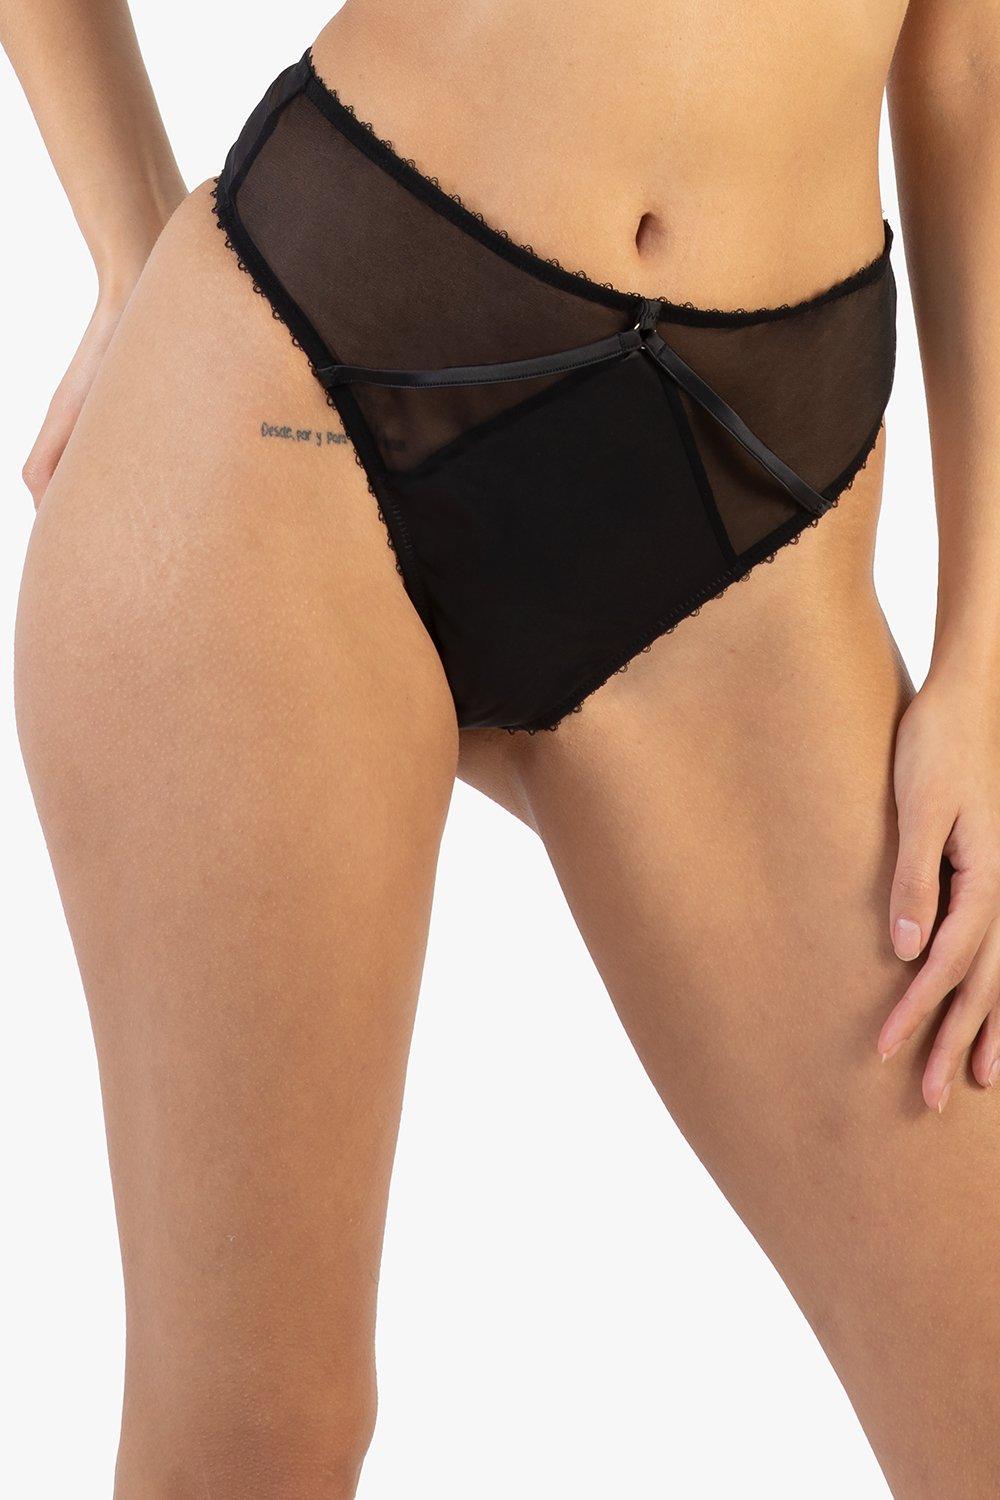 Noelle  Satin Strappy High Waist Thong